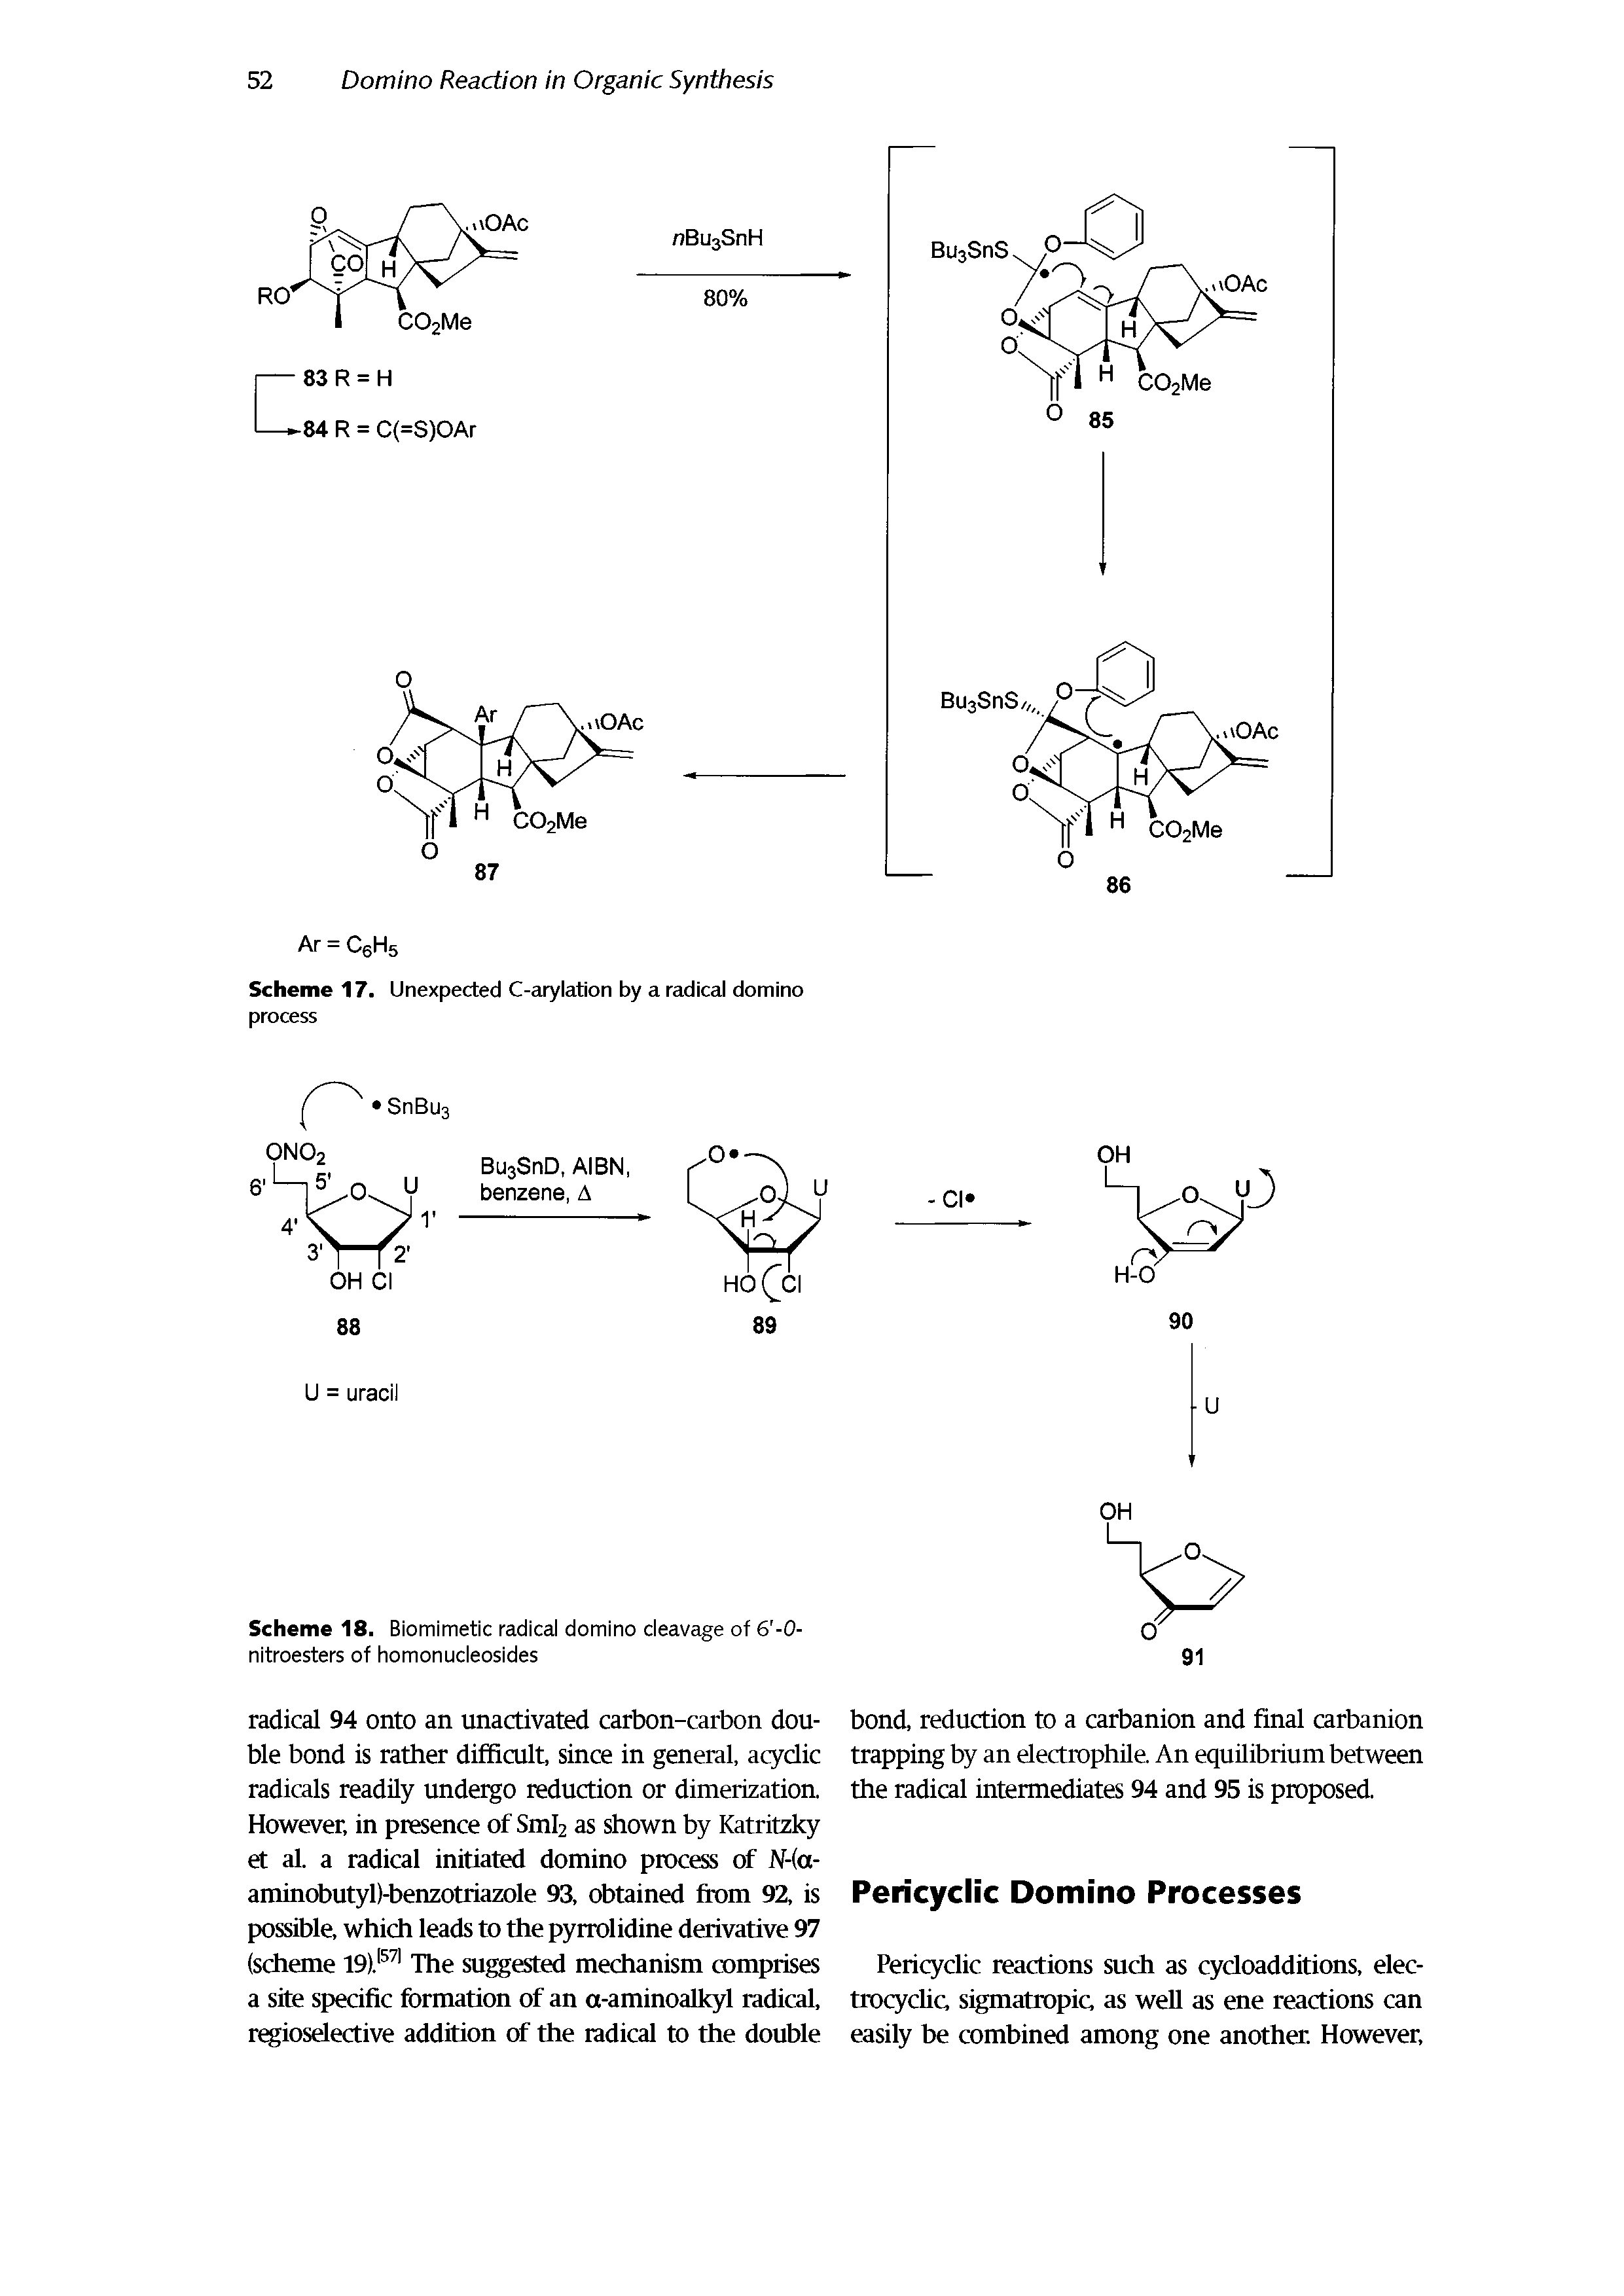 Scheme 17. Unexpected C-arylation by a radical domino process...